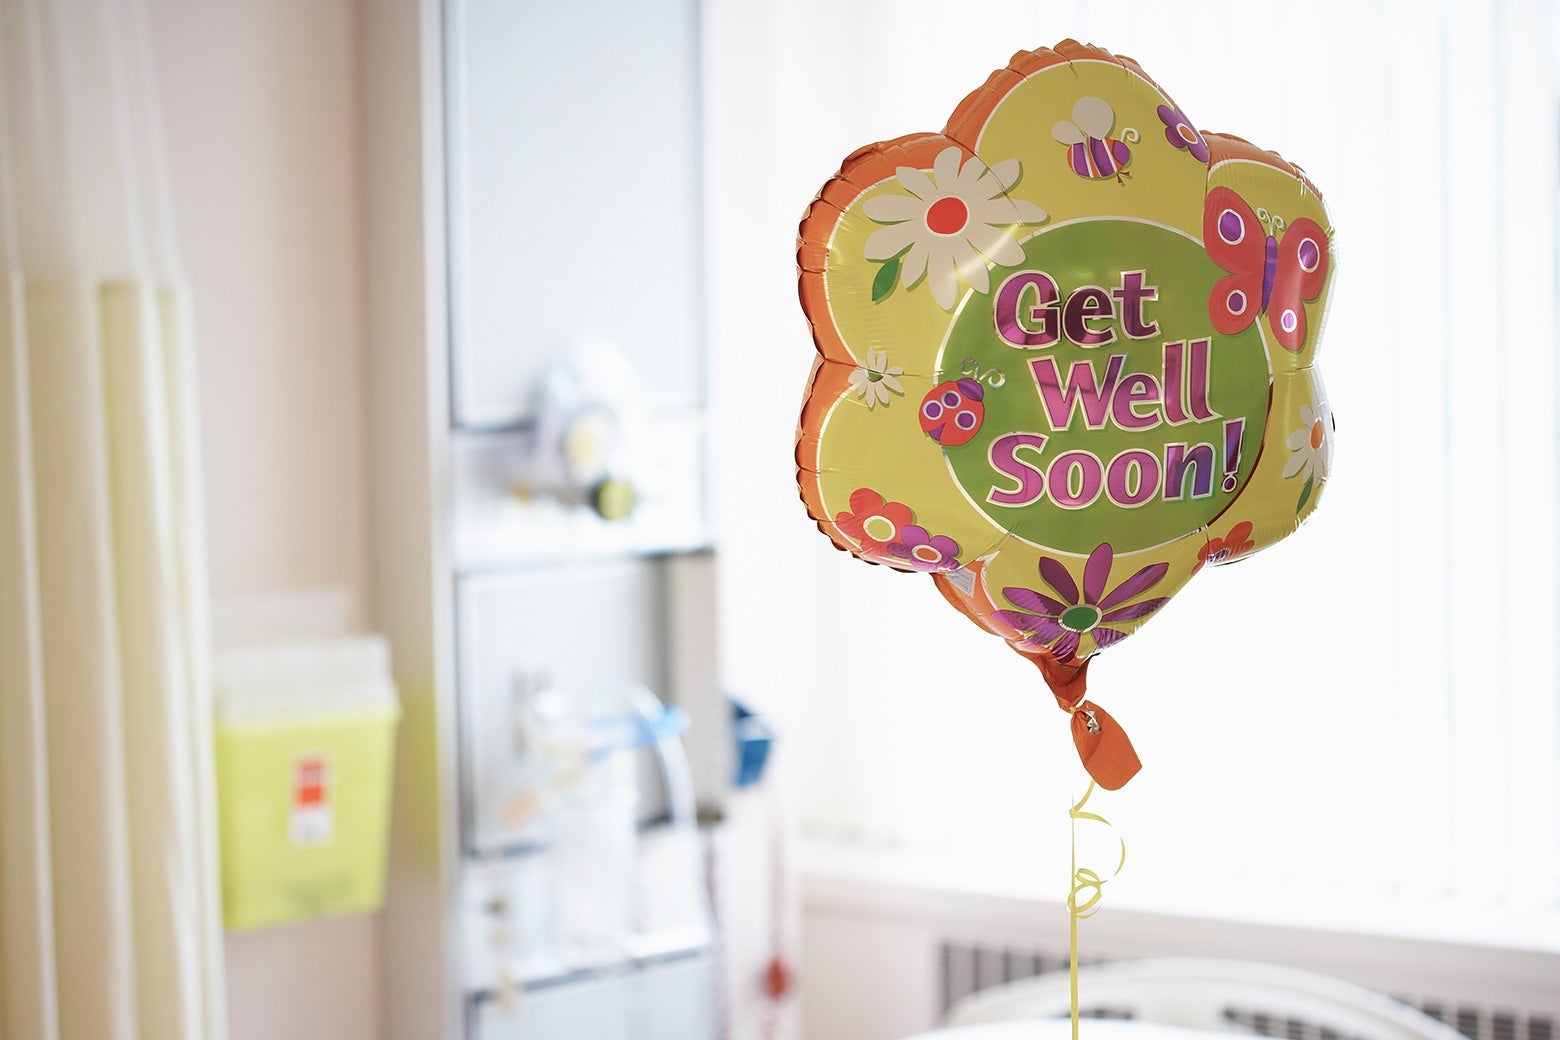 A "Get Well Soon" balloon in a hospital room.